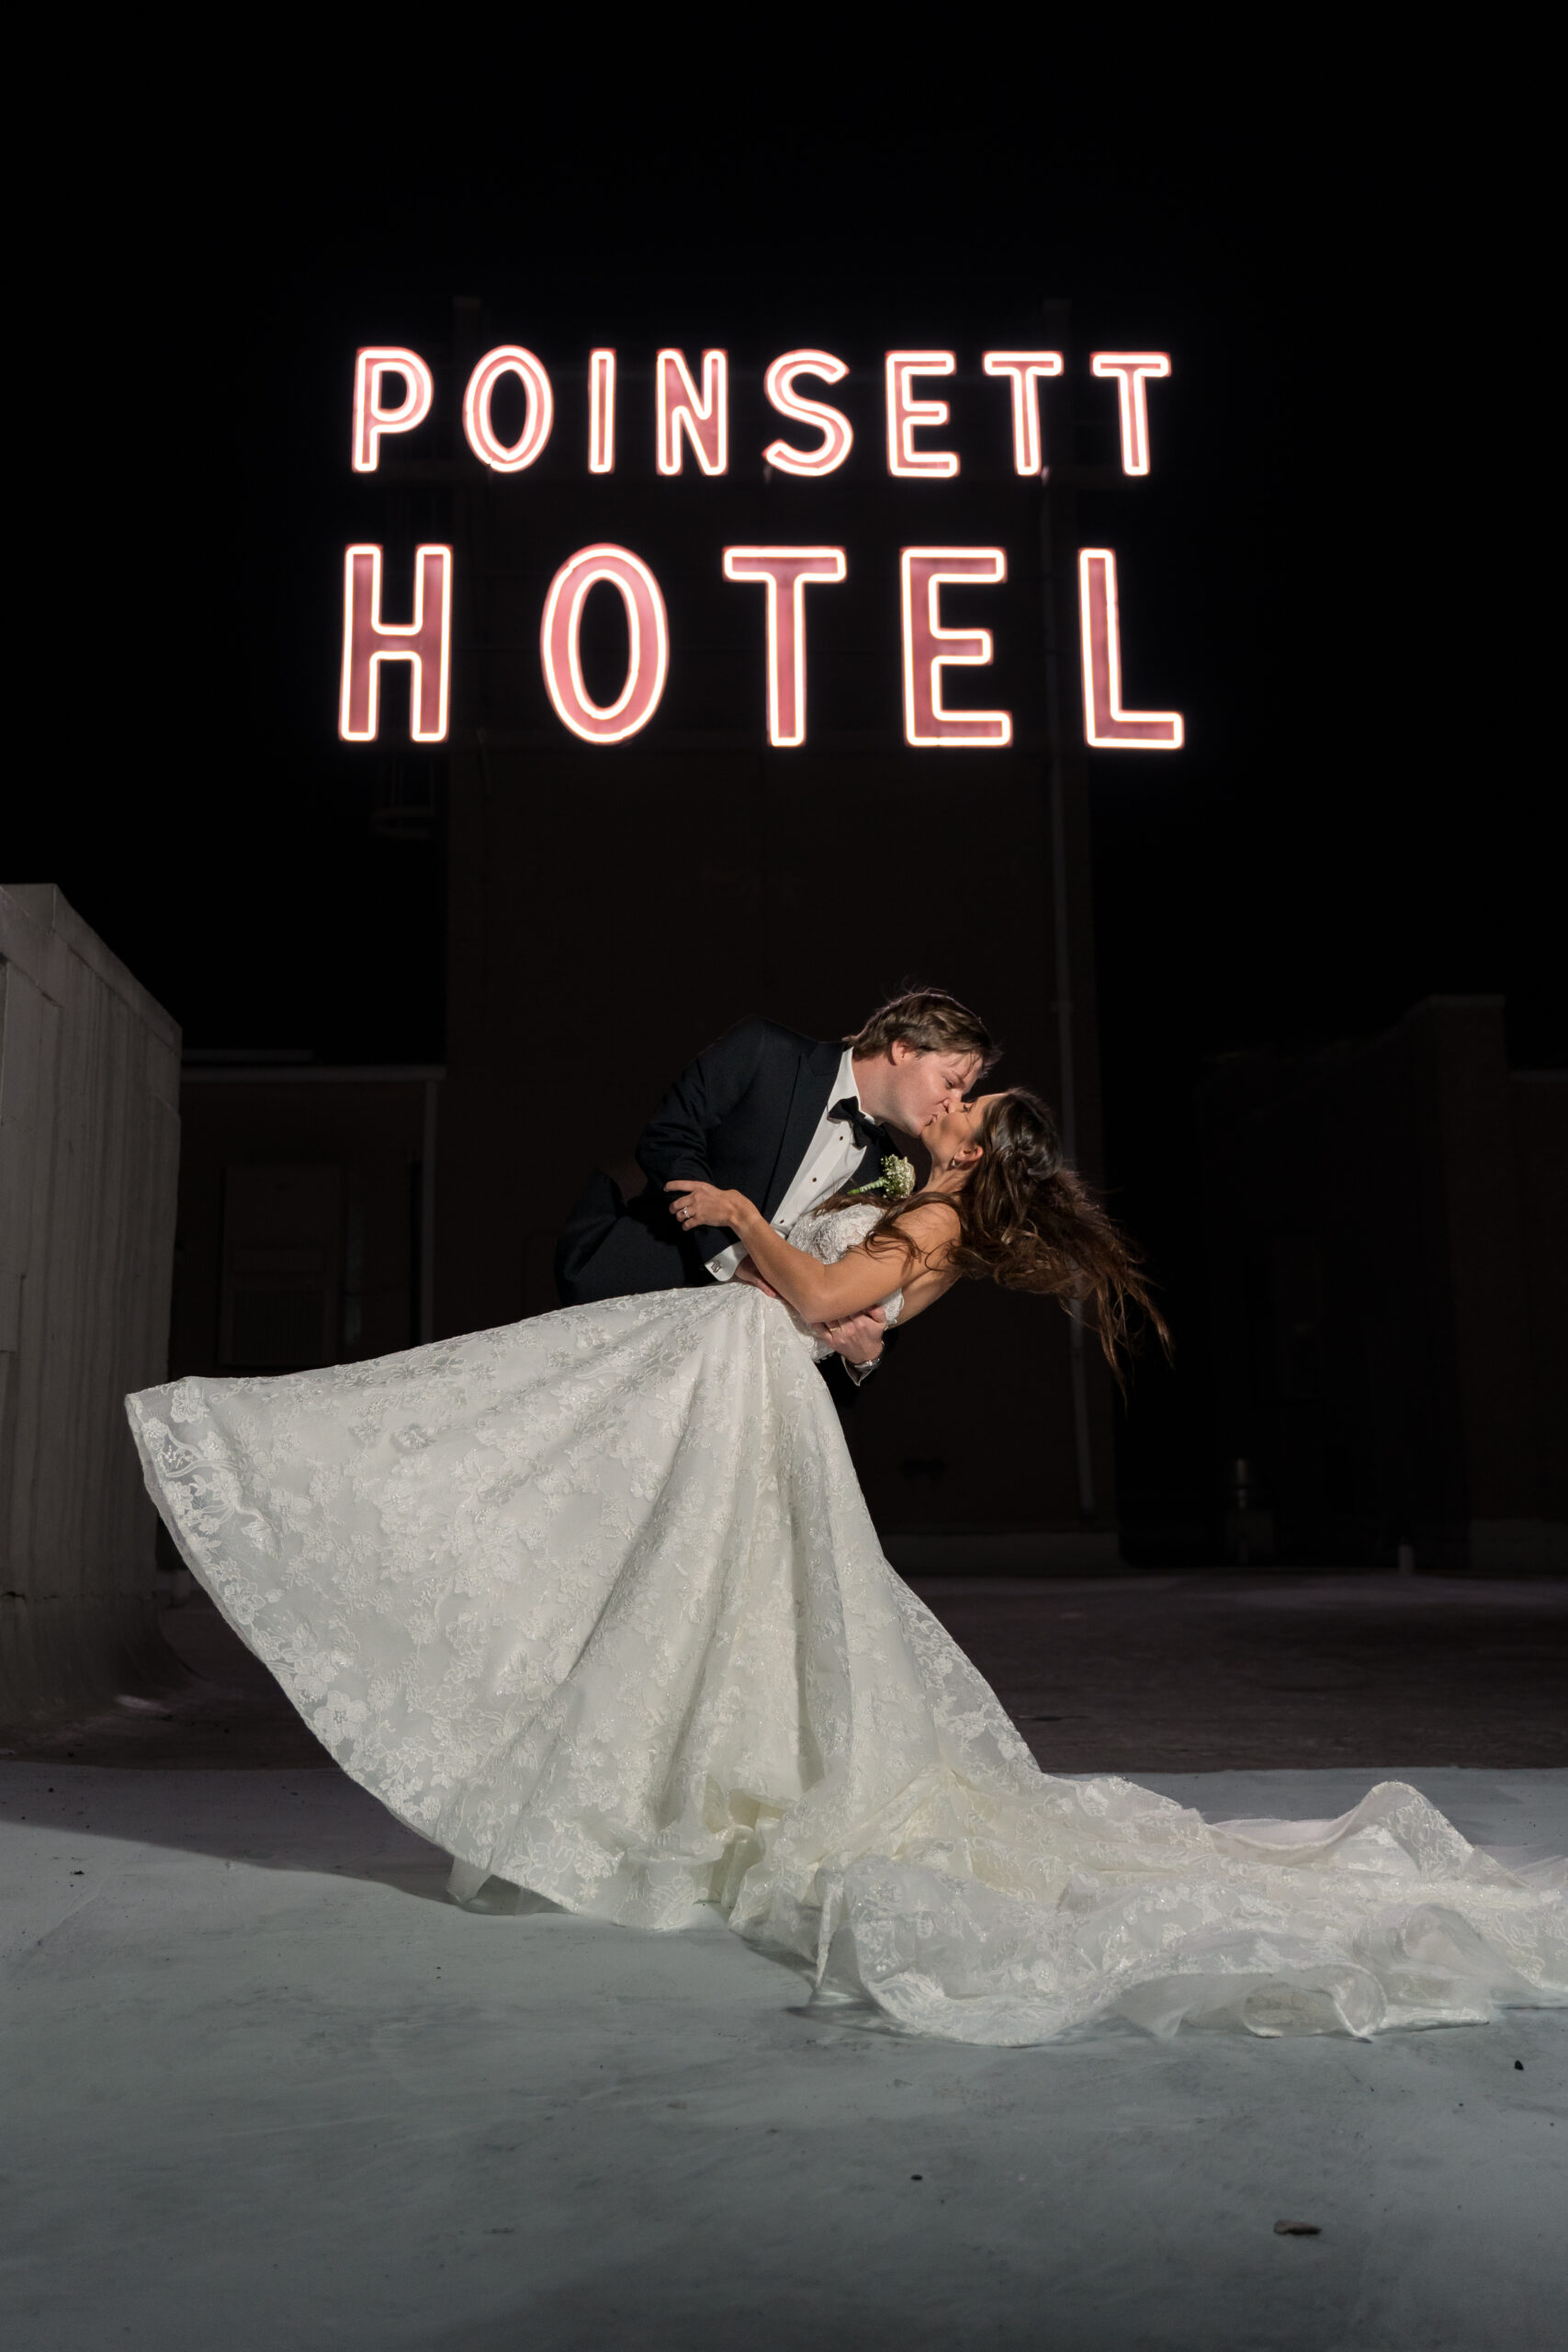 Anna and Sam share a kiss and a dip at night on the top of the Westin Poinsett. A huge, read, neon sign reading "Poinsett Hotel" shines behind them in the dark.